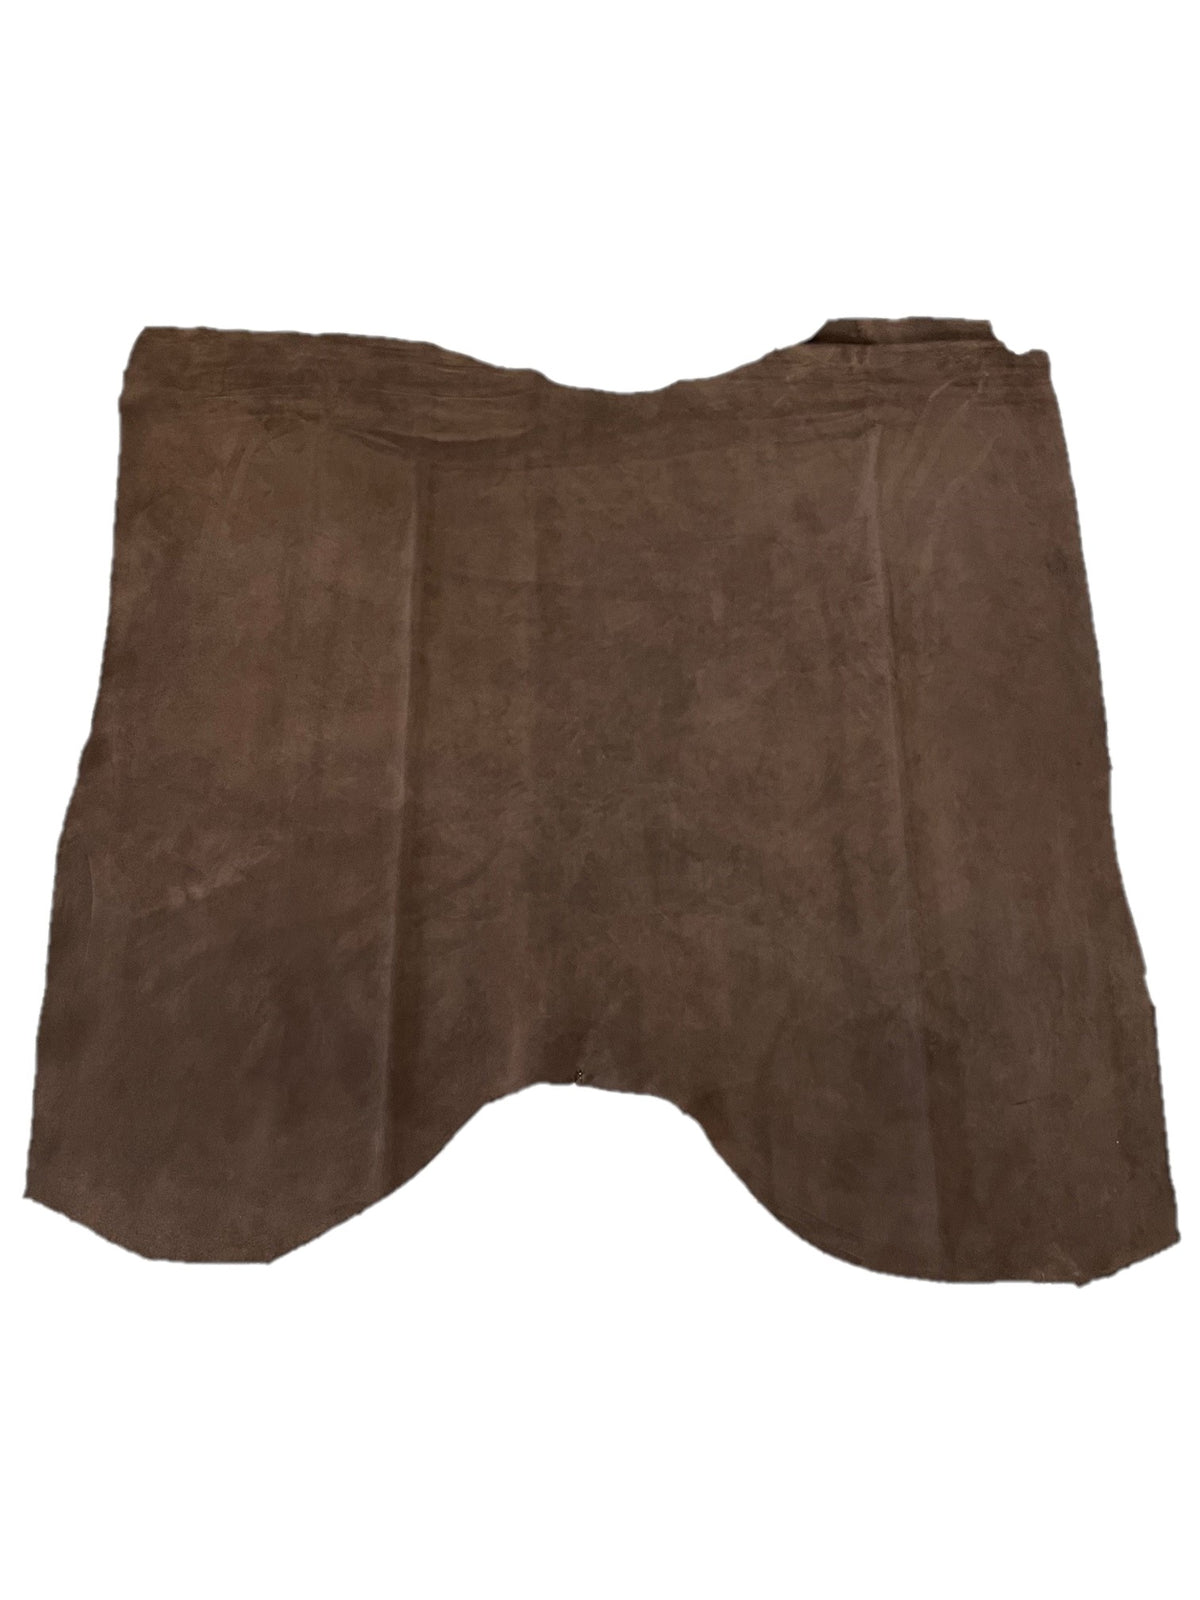 Cow Jersey Suede Double Butts | Brown | 1.2 mm | 13 sq.ft | From $75 ea.